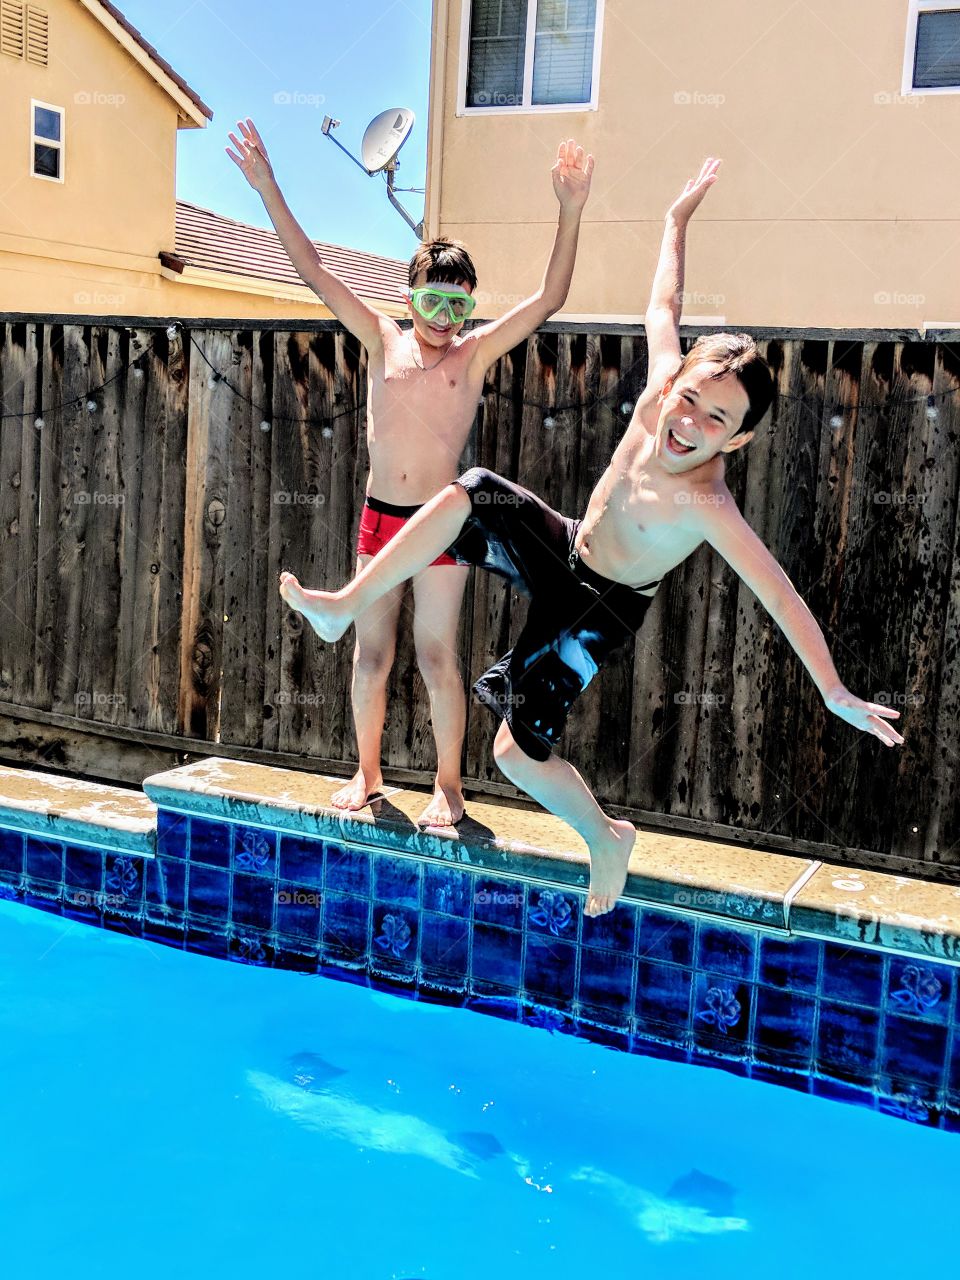 Out of school, into pool, goggles on, let's have some fun.